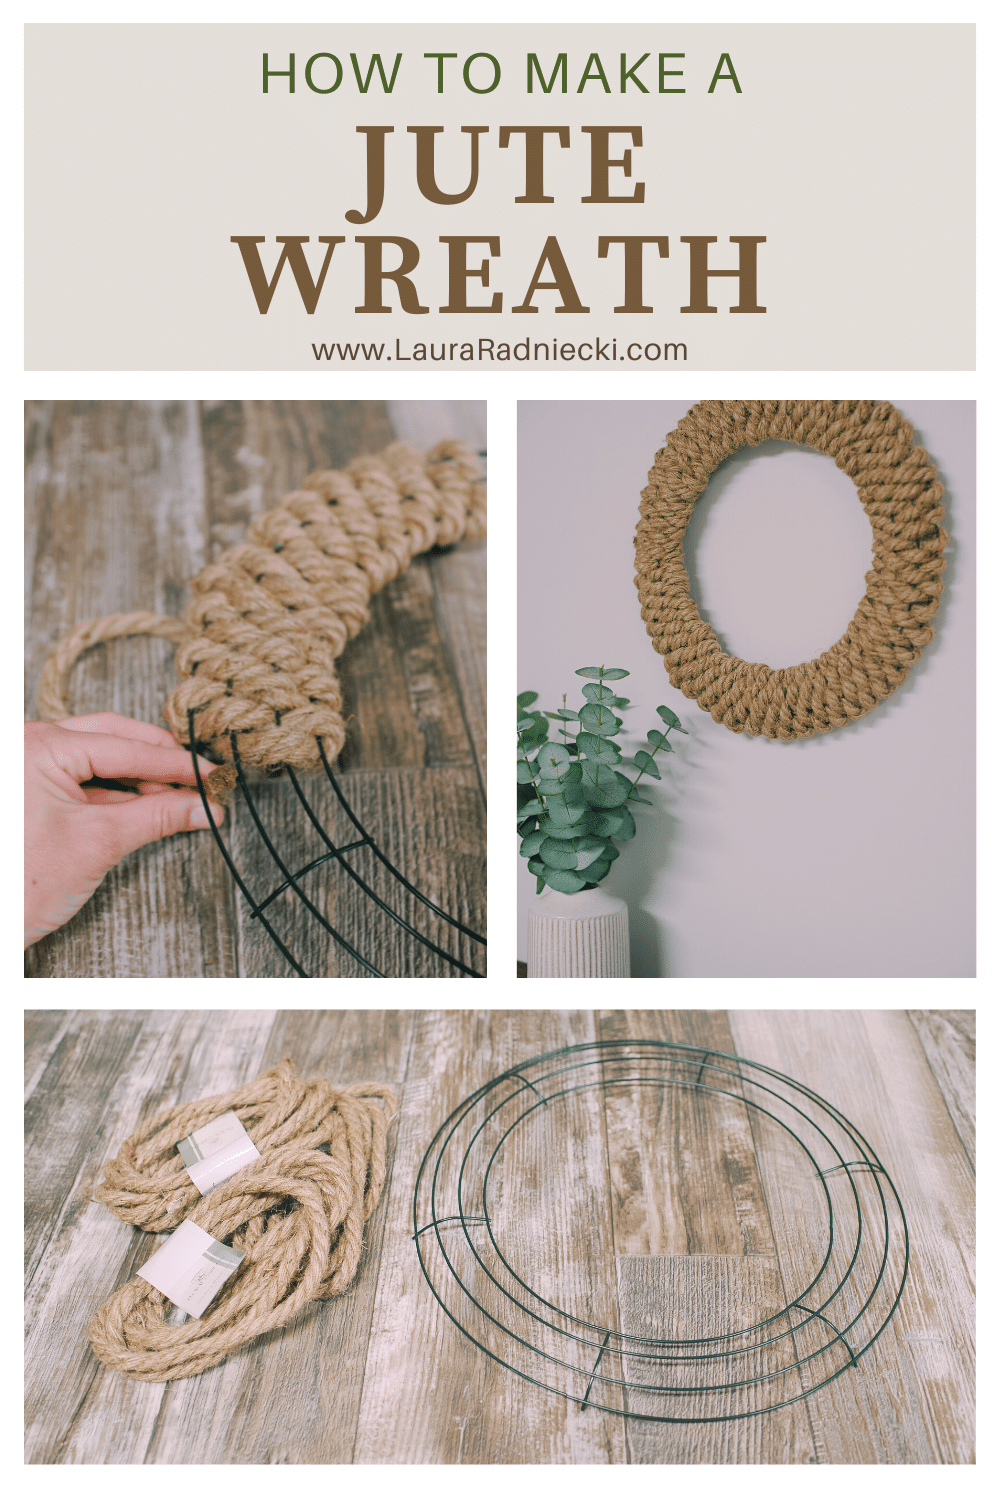 How to make a jute wreath using jute rope from the Dollar Tree